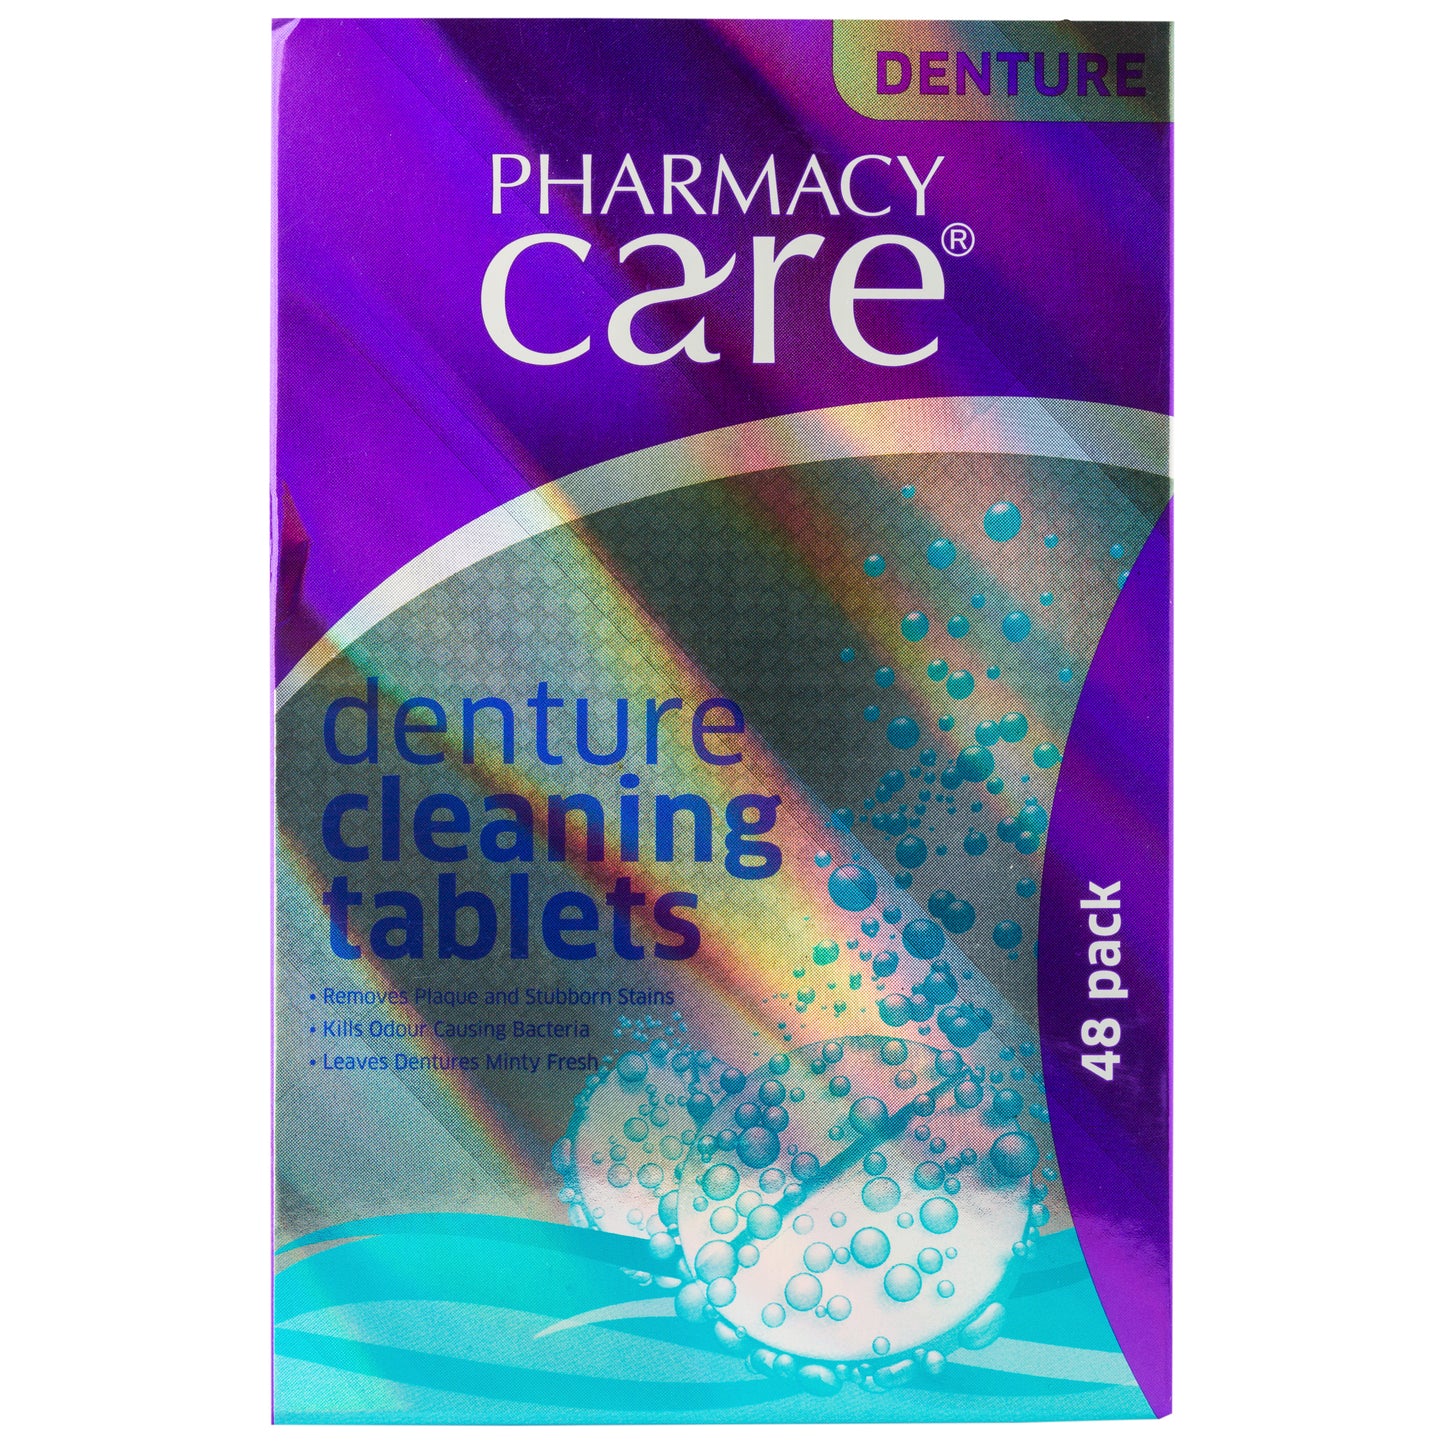 Pharmacy Care Denture Cleaning Tablets 48 Pack